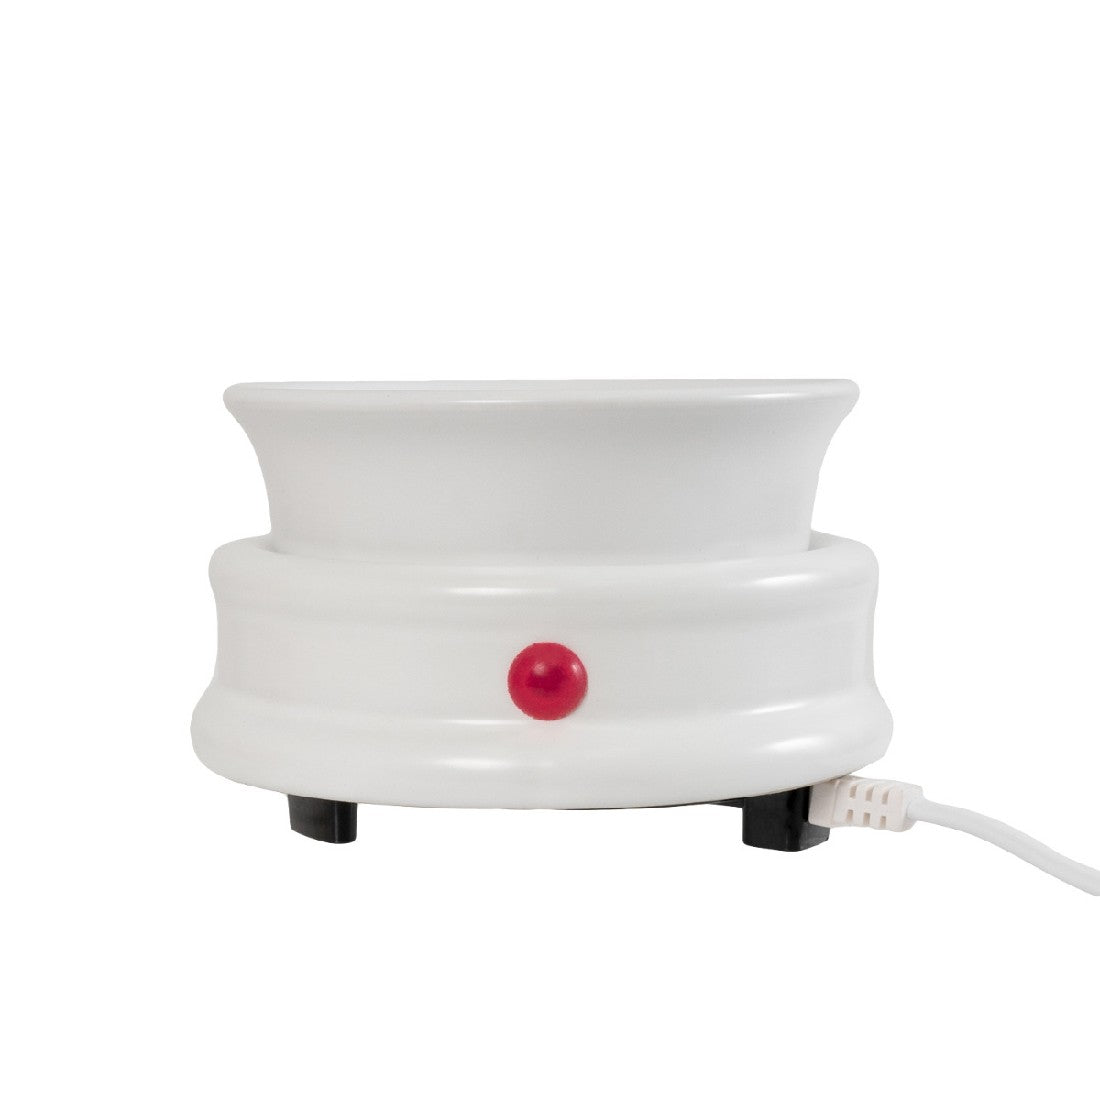 Wax Melter Electric